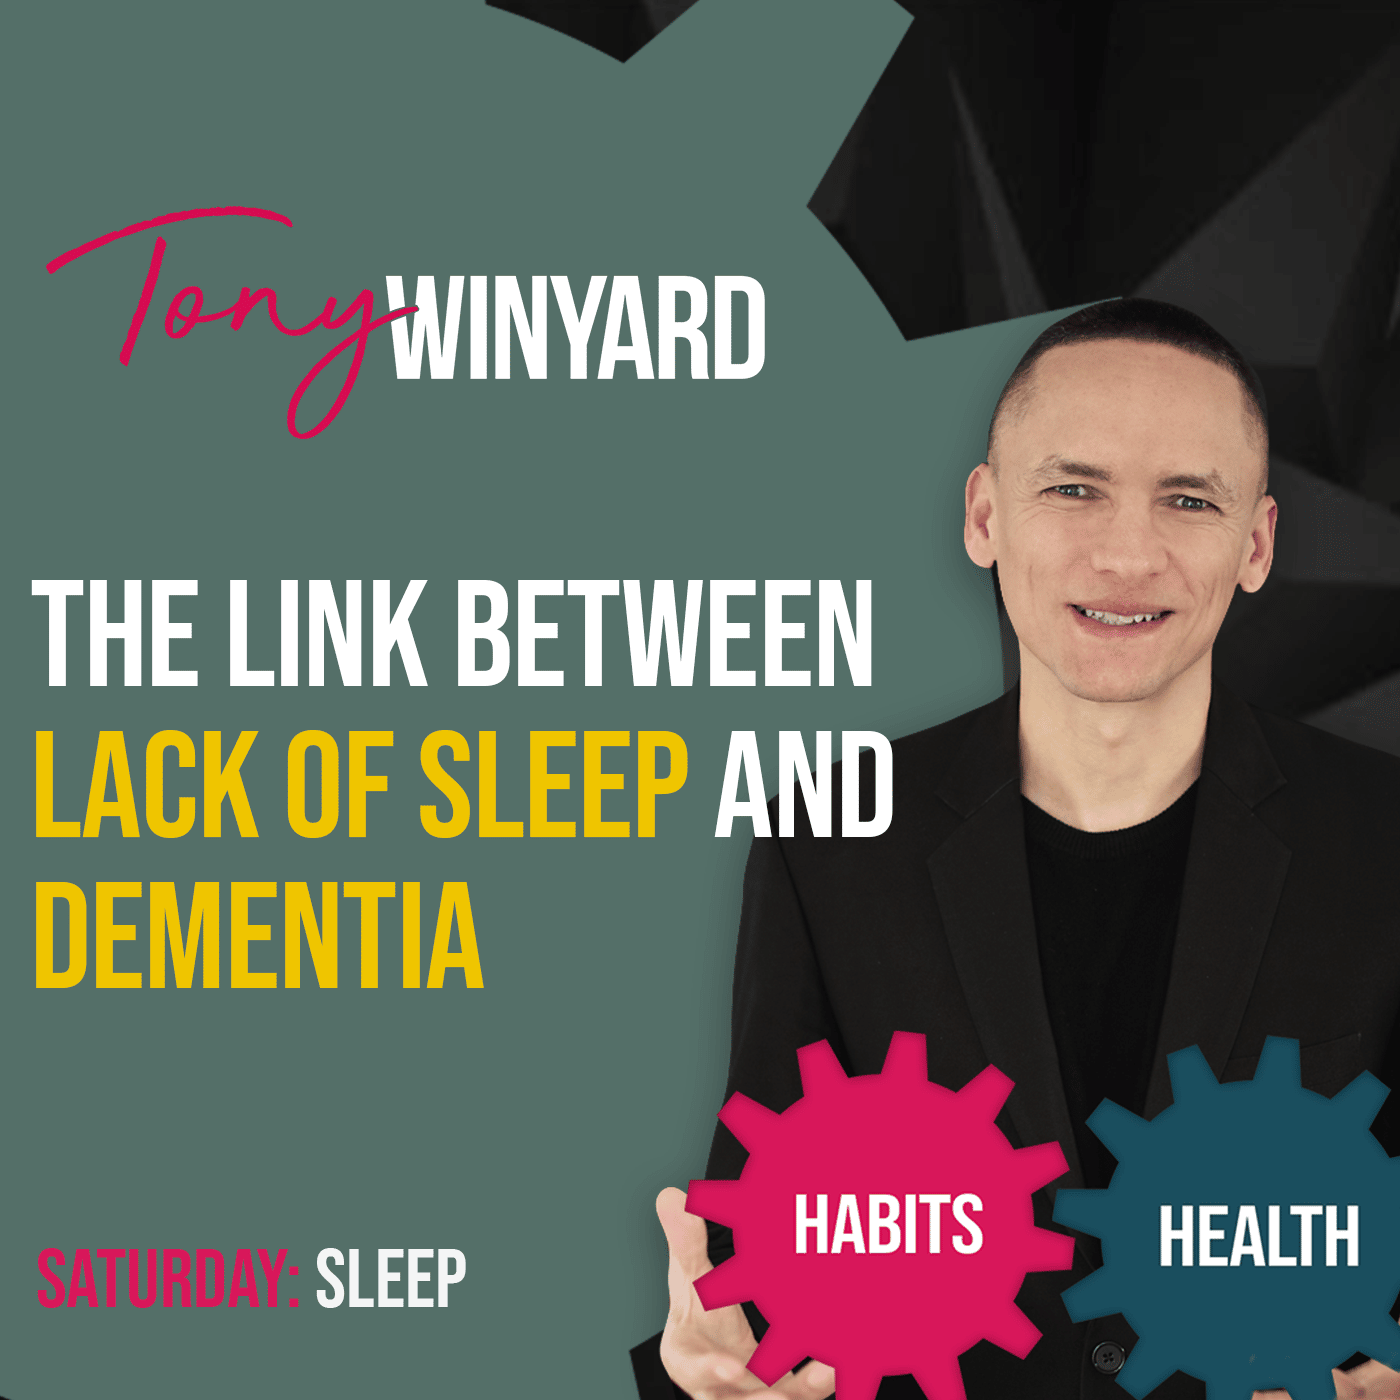 The link between lack of sleep and dementia